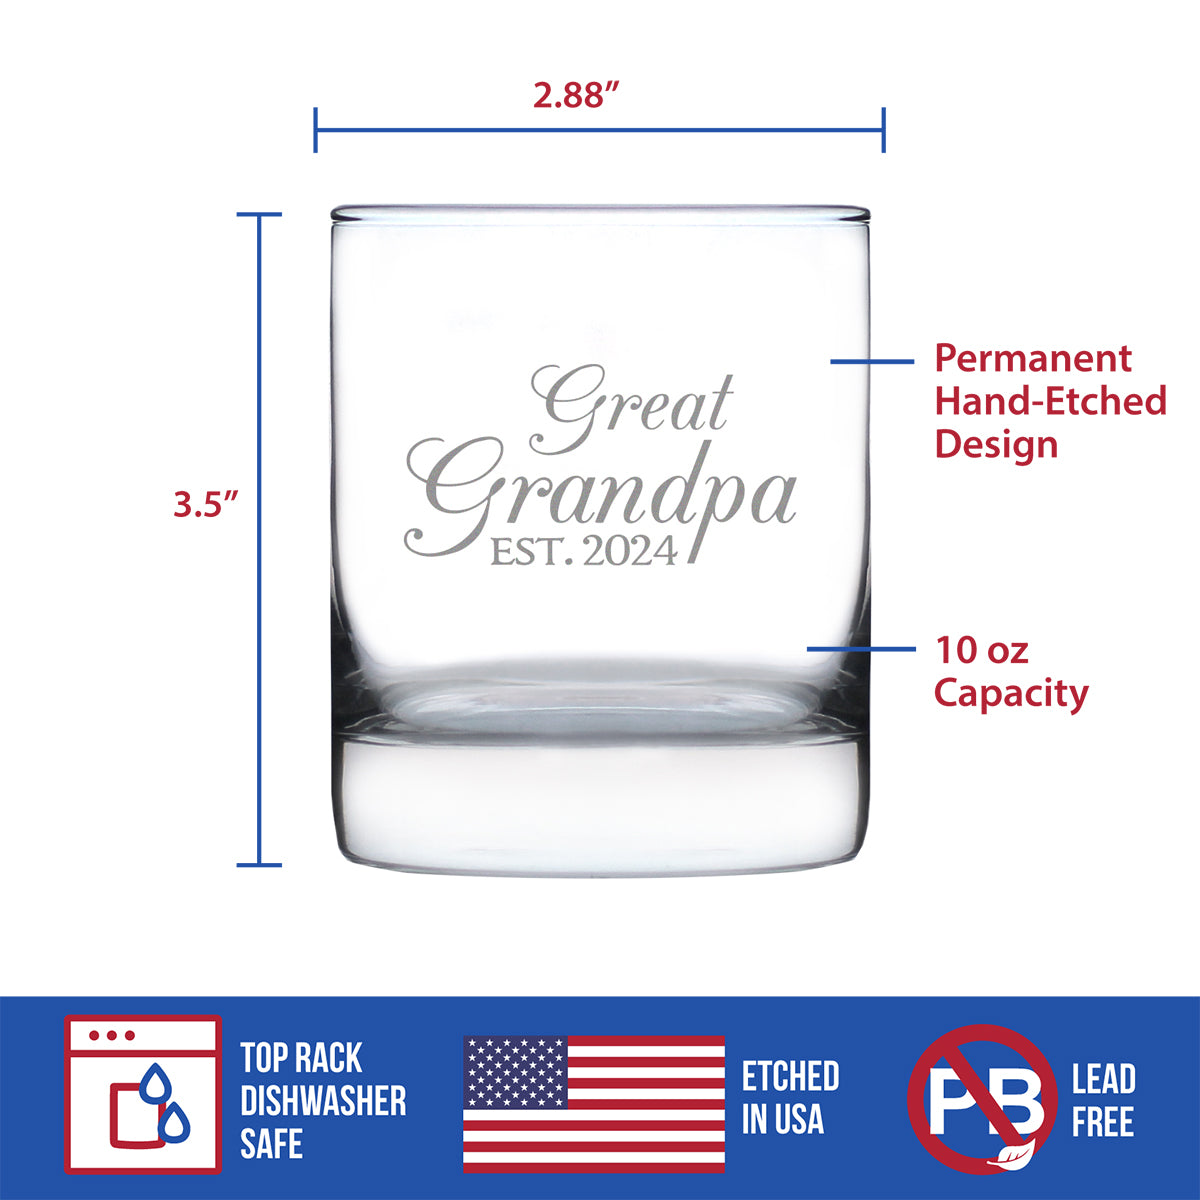 Great Grandpa Est 2024 - New Great Grandfather Whiskey Rocks Glass Gift for First Time Great Grandparents - Decorative 10.25 Oz Glasses